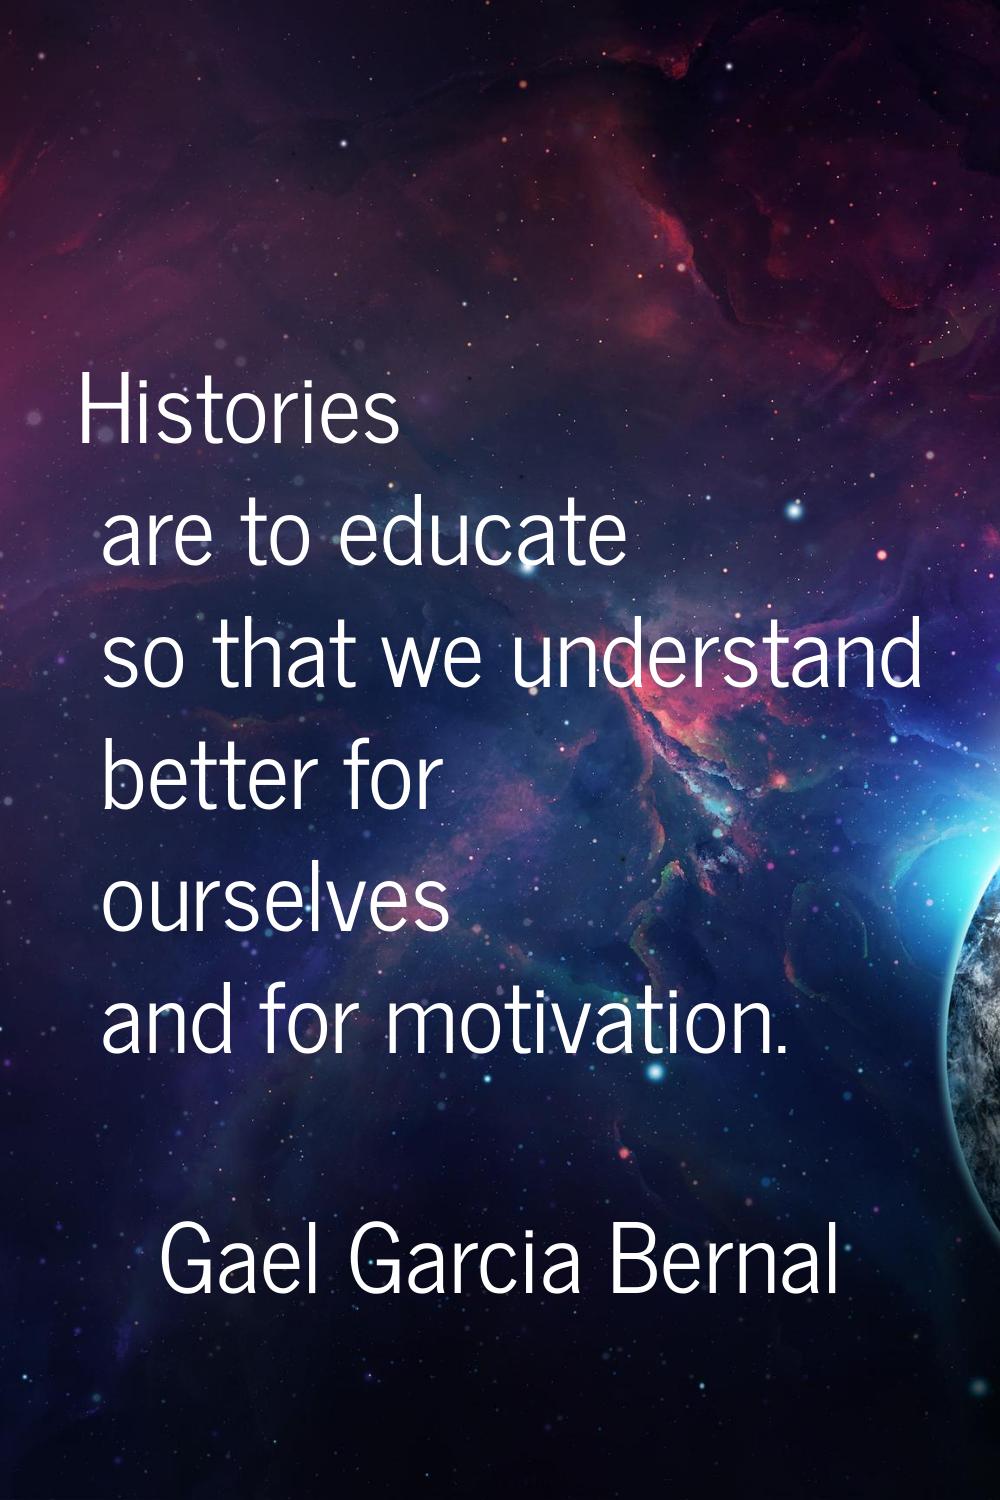 Histories are to educate so that we understand better for ourselves and for motivation.